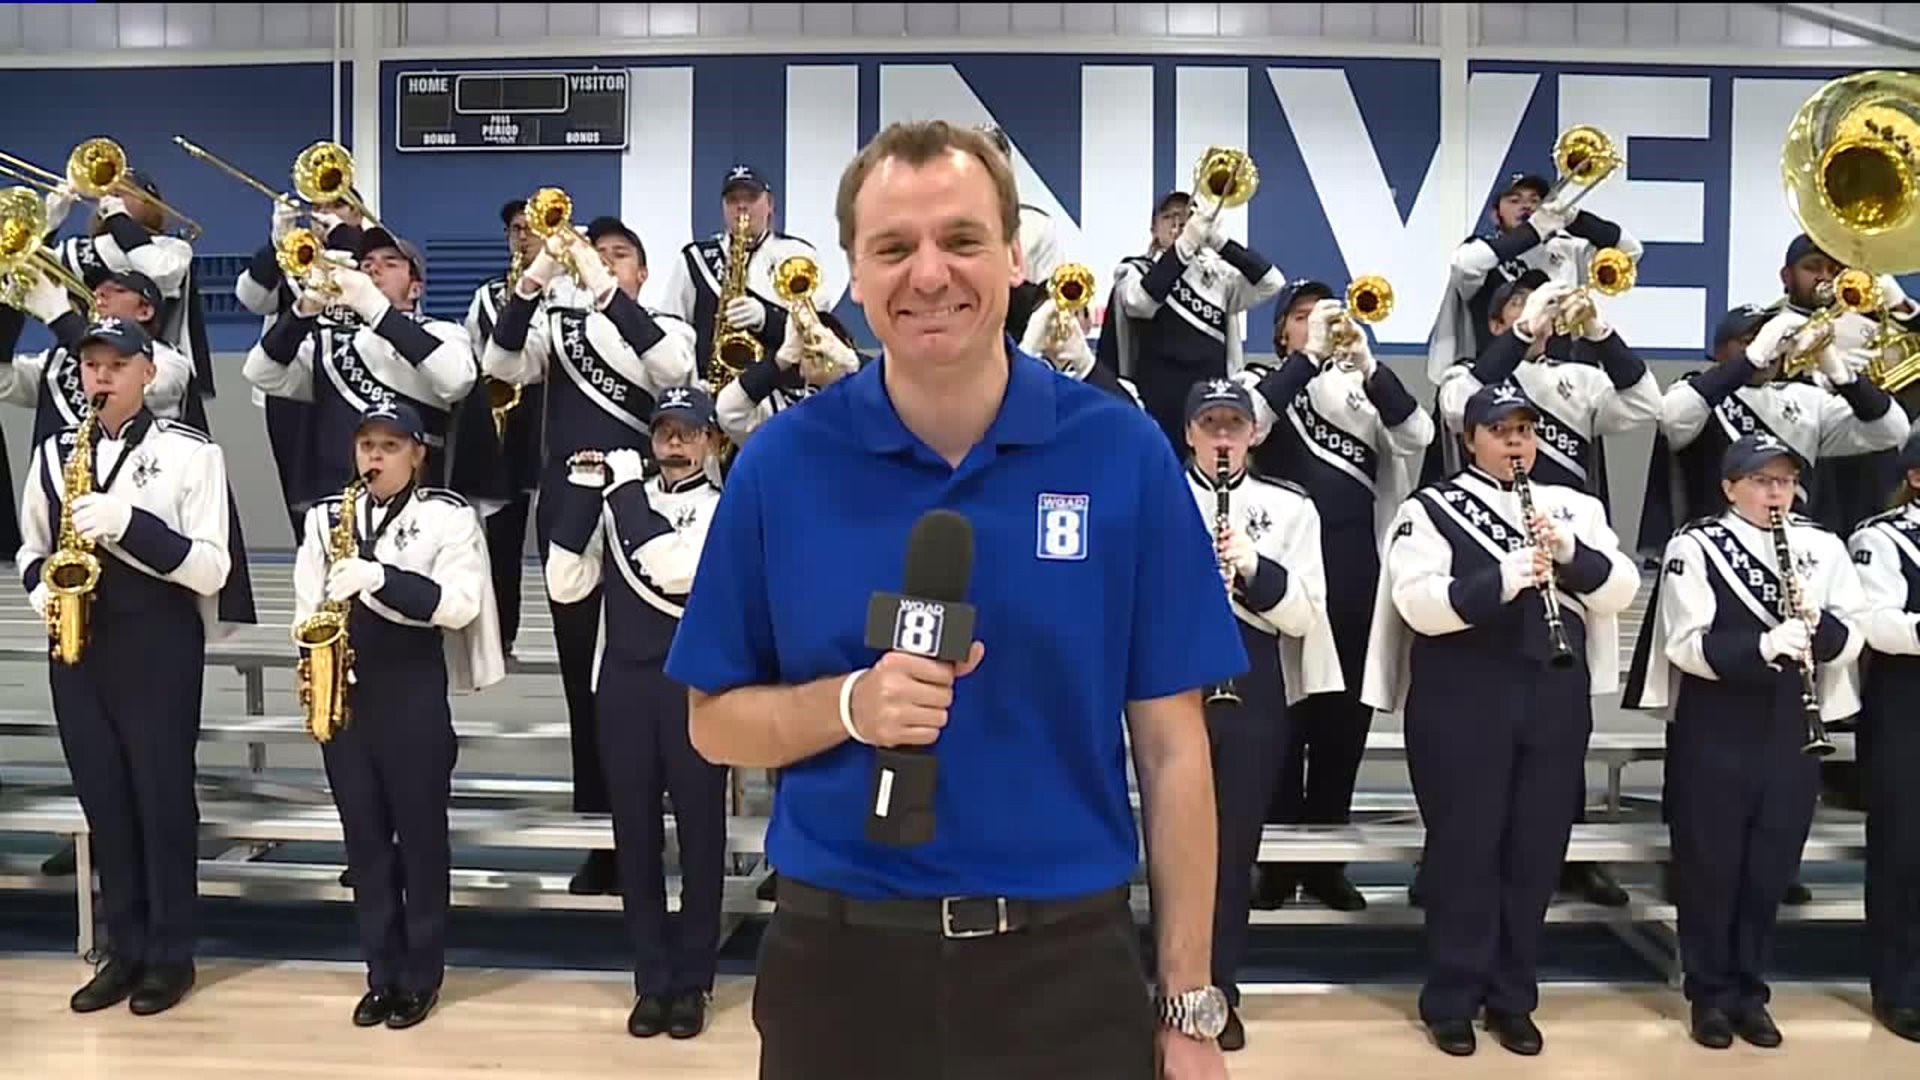 The Finale for Week 4 of The Score Pre-Game Pep Rally